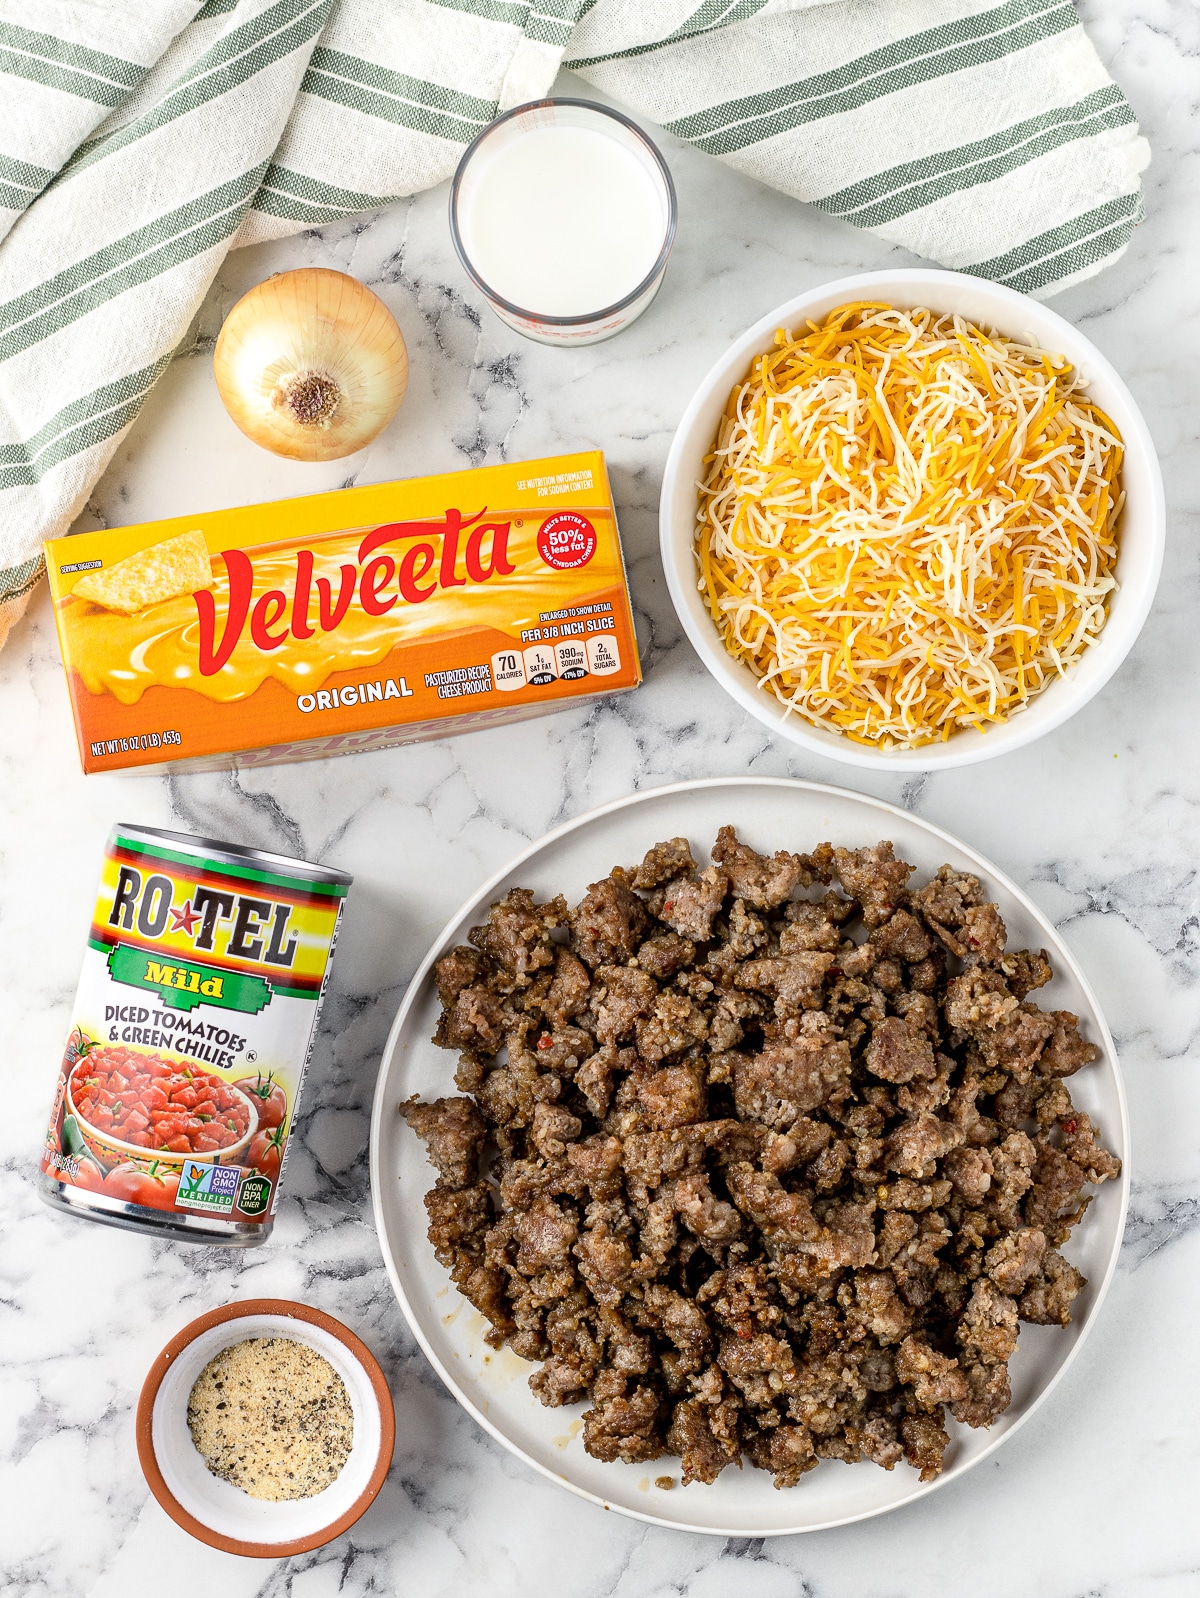 Ingredients. Velveeta cheese, breakfast sausage, rotel and chilies, mexican cheese, diced onion, evaporated milk, garlic powder, salt and pepper.